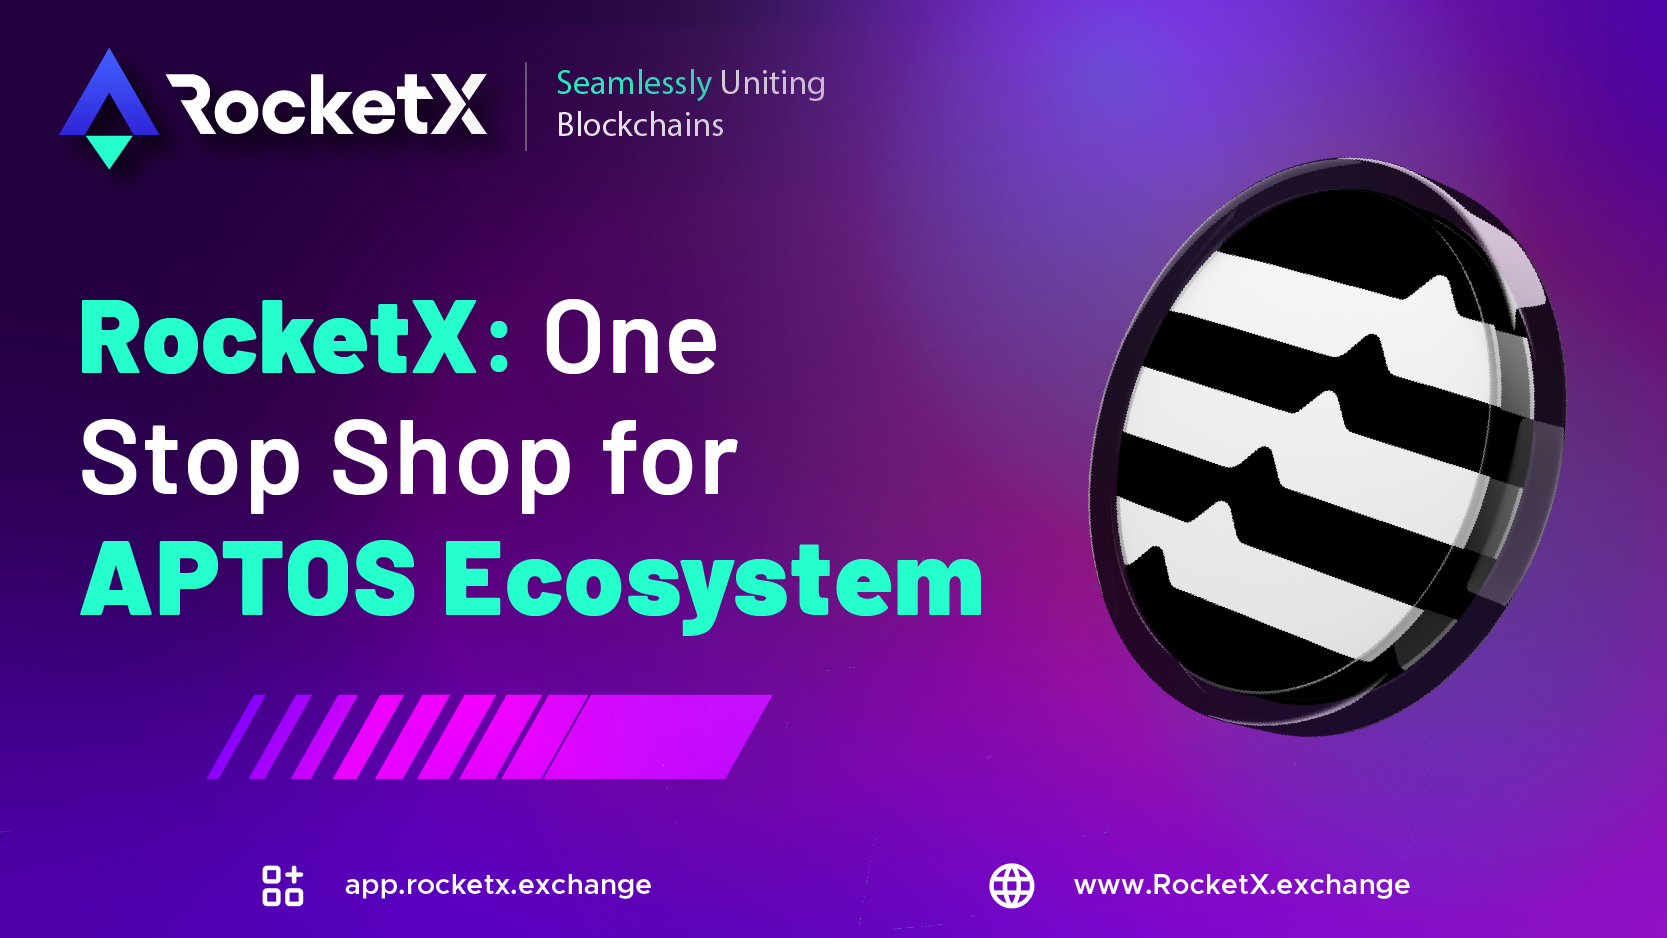 "RocketX: One Stop Shop for Aptos Ecosystem – logo with a stylized coin against a gradient purple background."